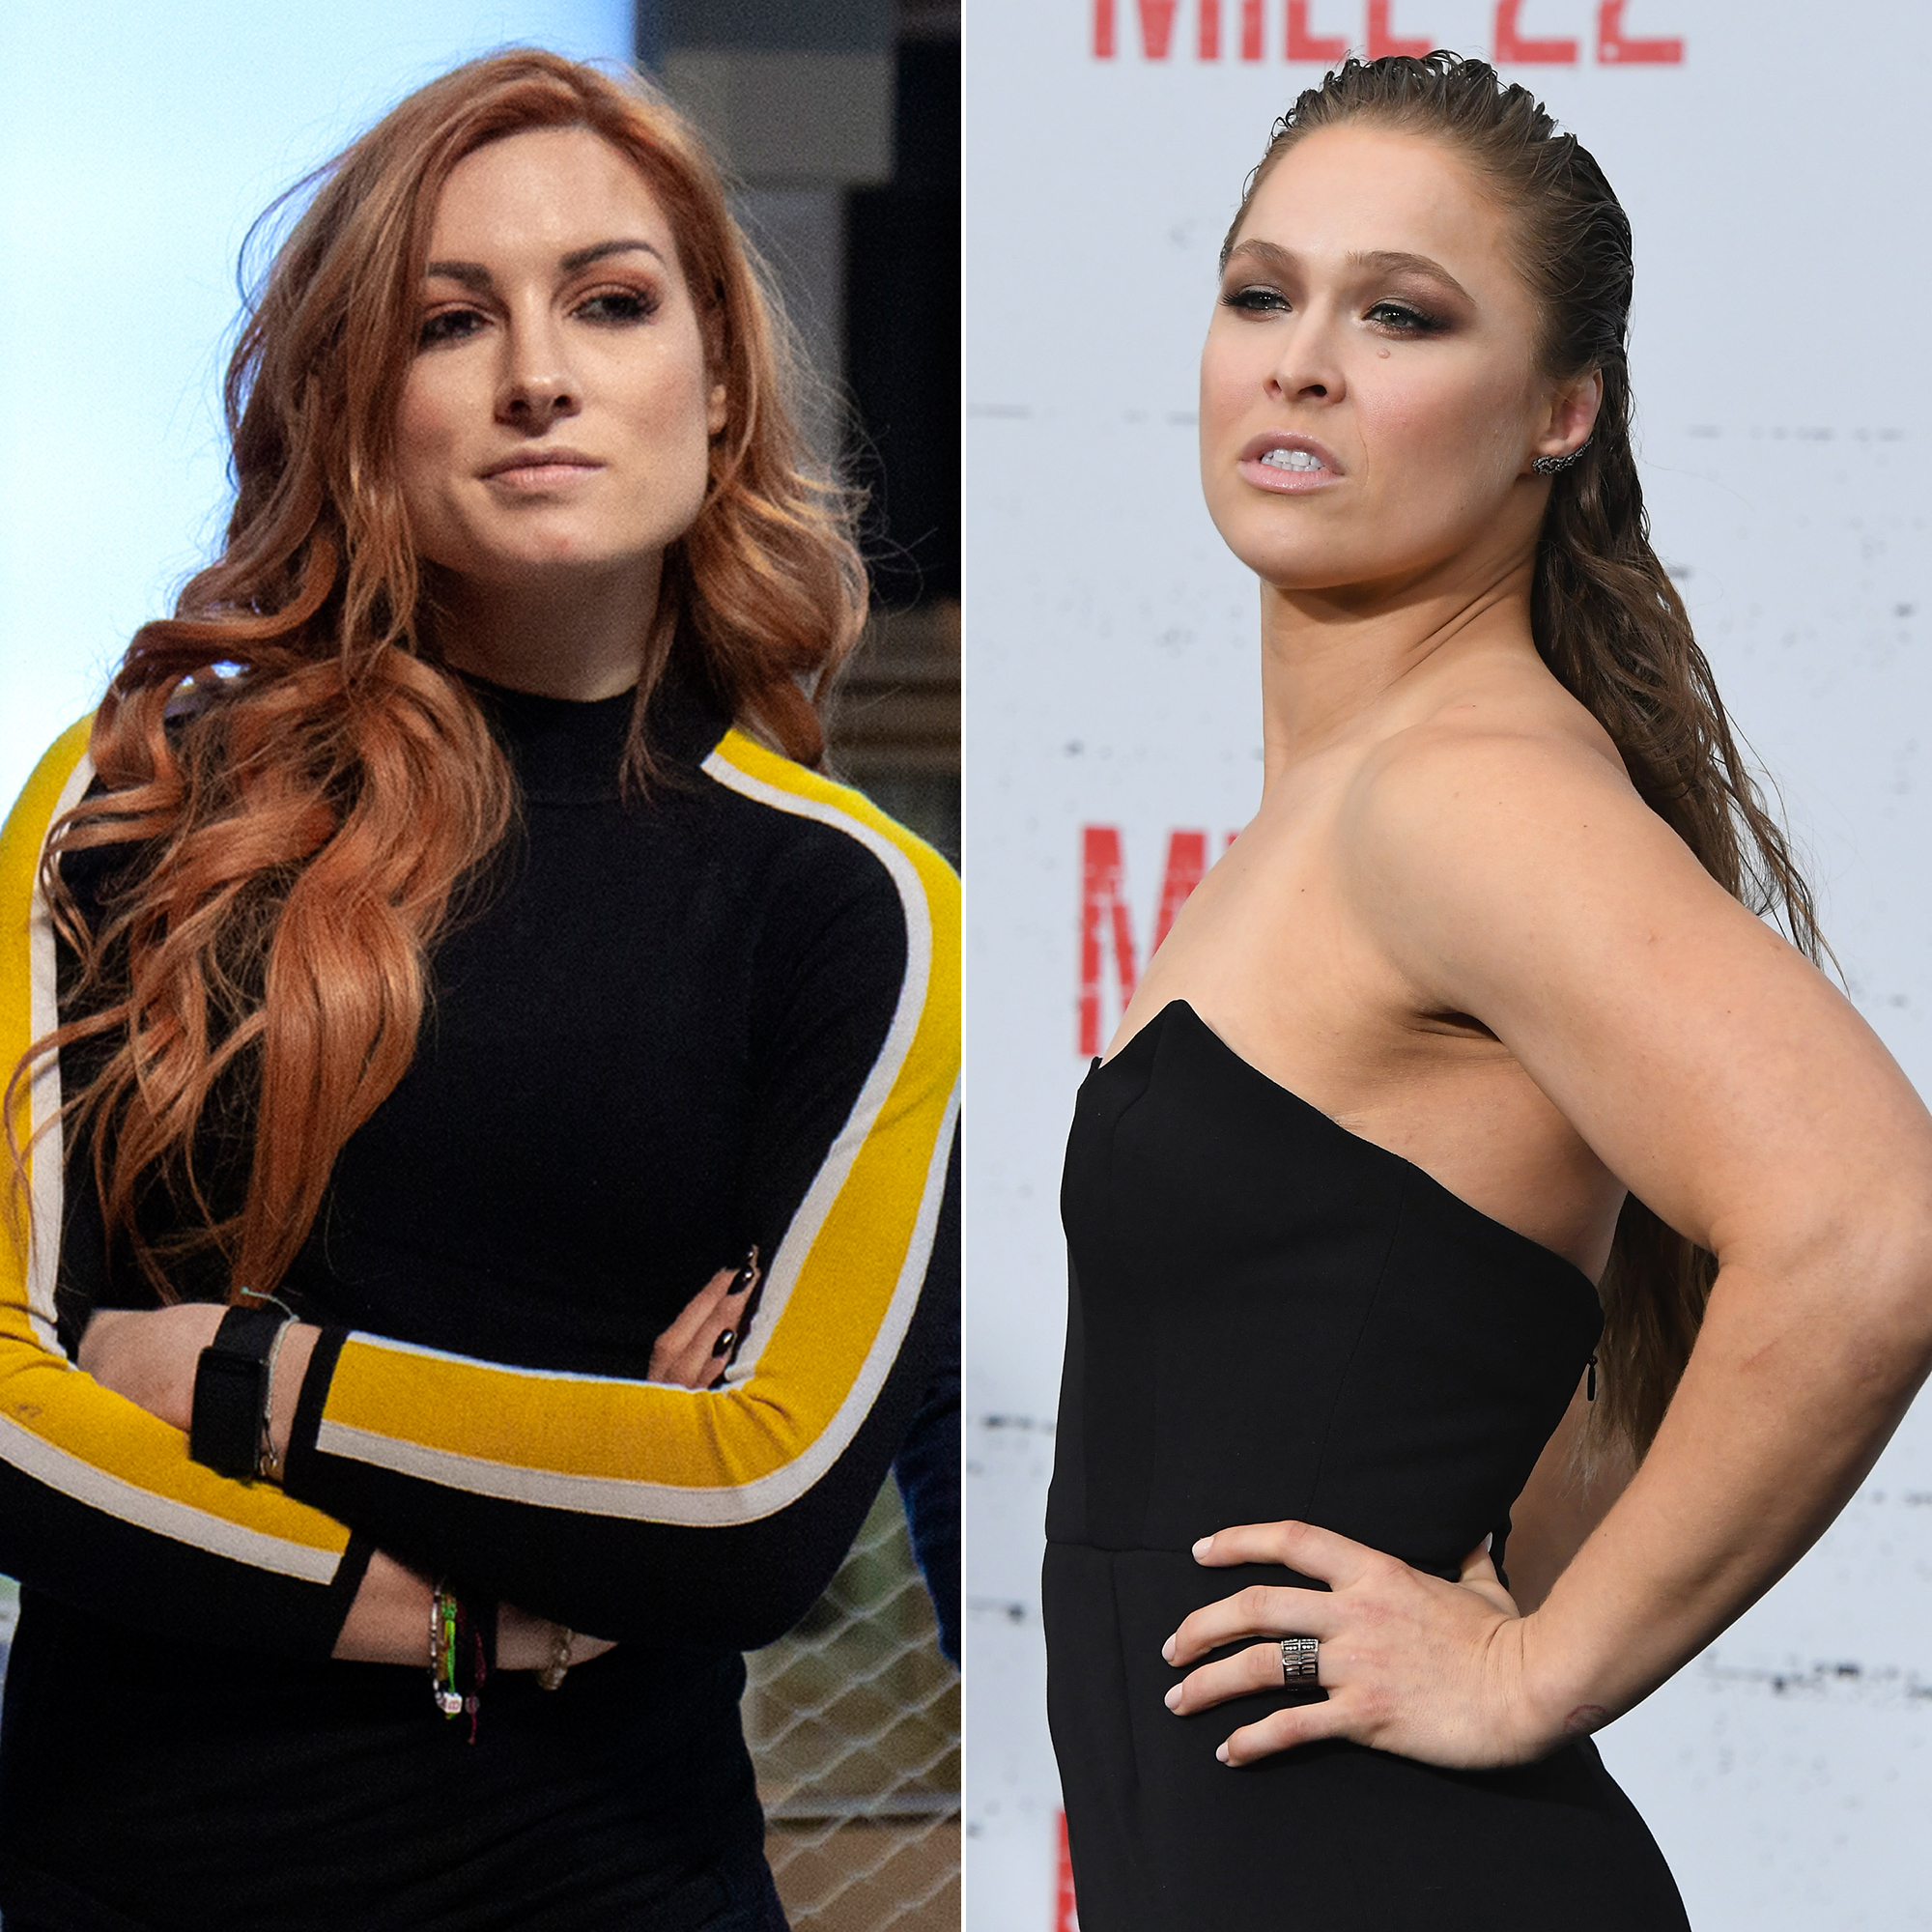 She's 'The Man': Meet Becky Lynch, the Irish WWE superstar and the only  woman to pin UFC legend Ronda Rousey (VIDEO) — RT Sport News